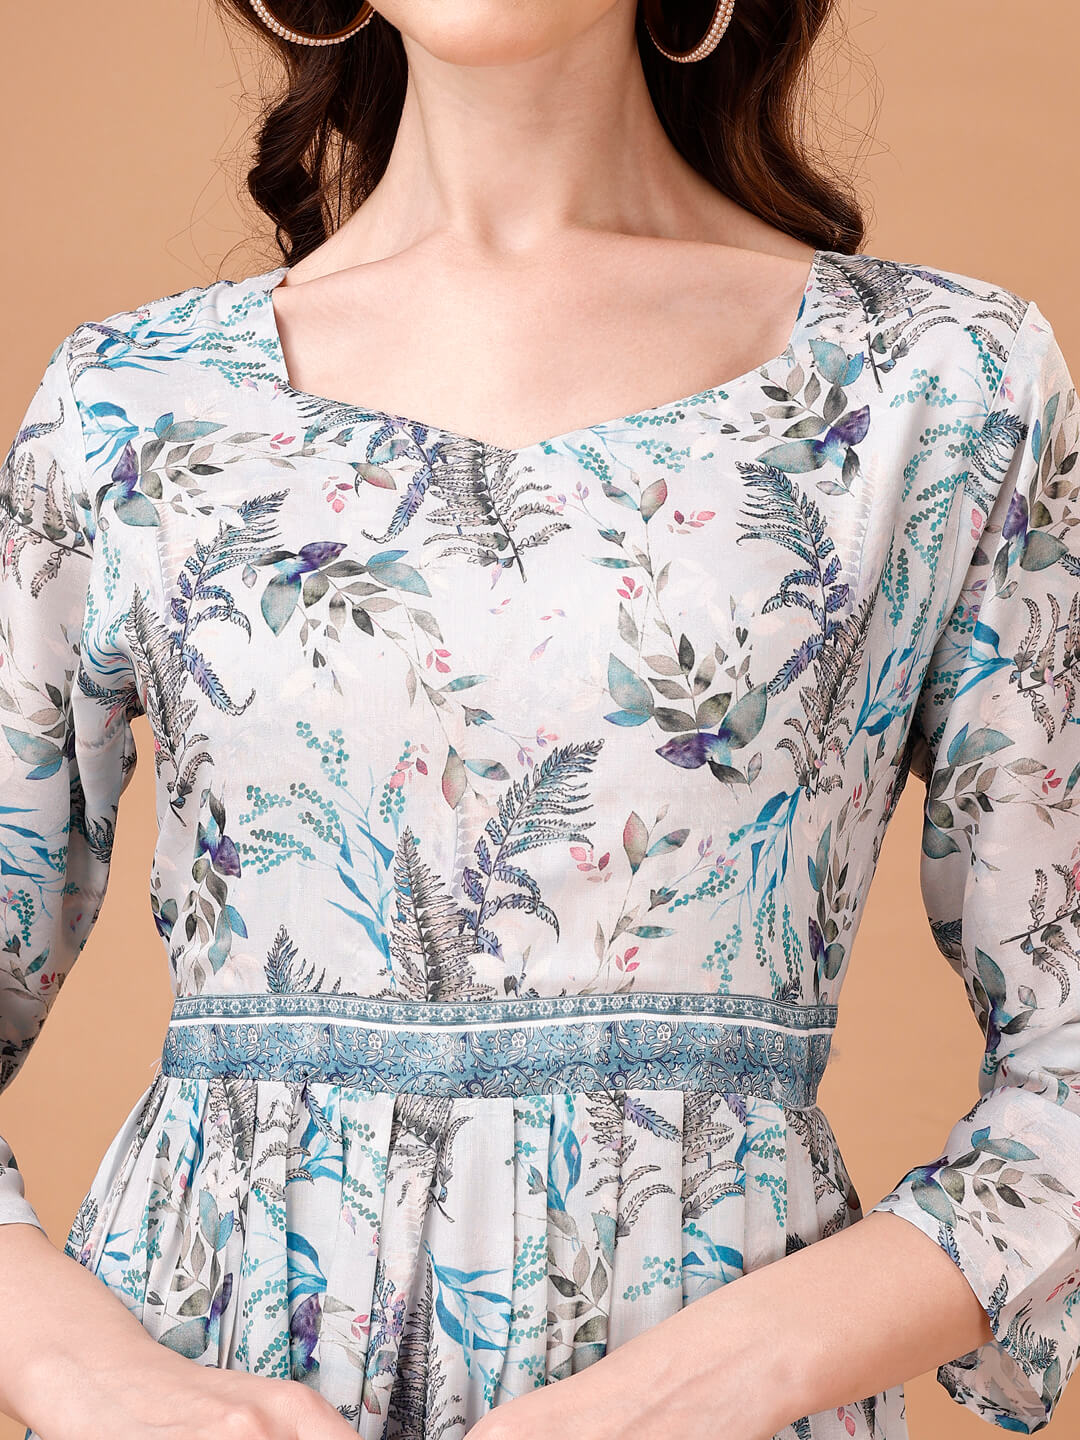 Blooming Elegance: Floral Printed Maxi Dress in Luxuriously Soft Fabric - thevendorvilla